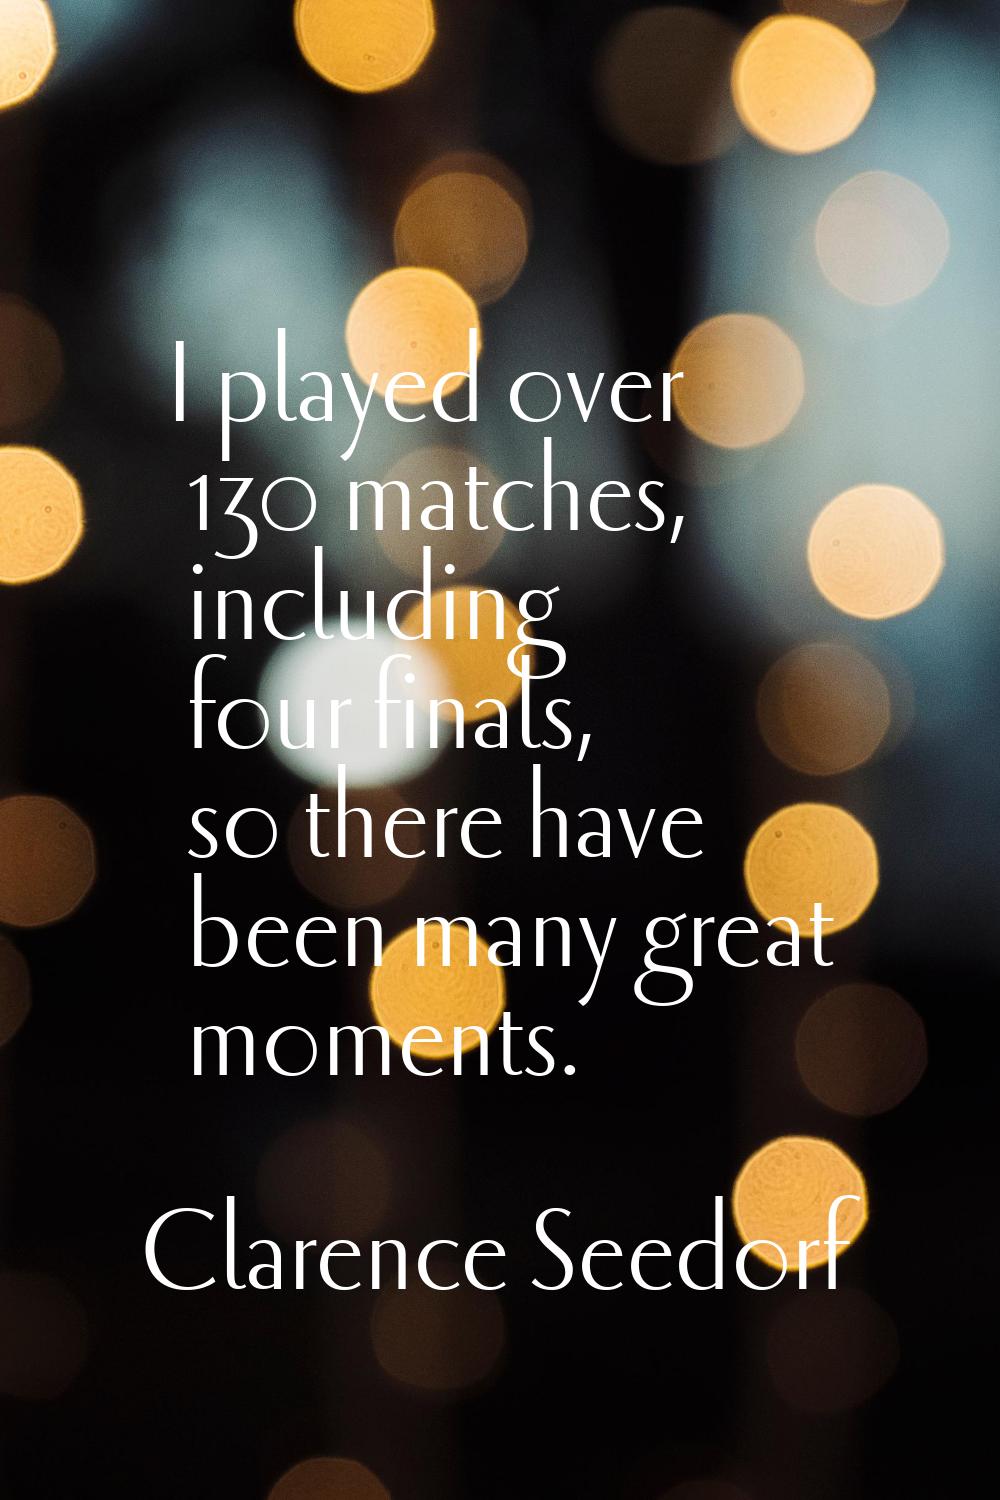 I played over 130 matches, including four finals, so there have been many great moments.